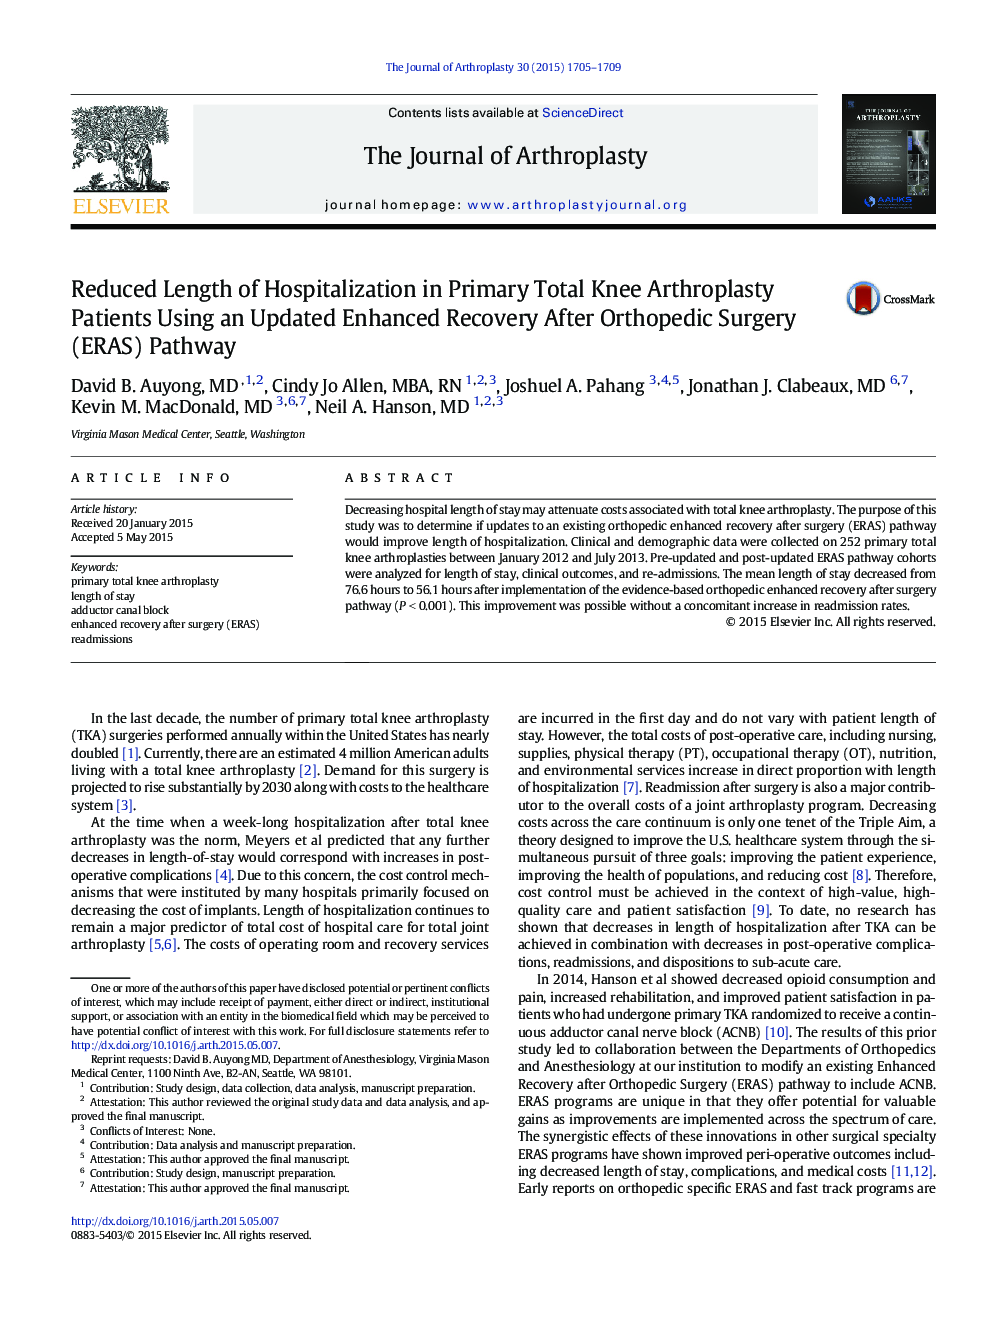 Reduced Length of Hospitalization in Primary Total Knee Arthroplasty Patients Using an Updated Enhanced Recovery After Orthopedic Surgery (ERAS) Pathway 